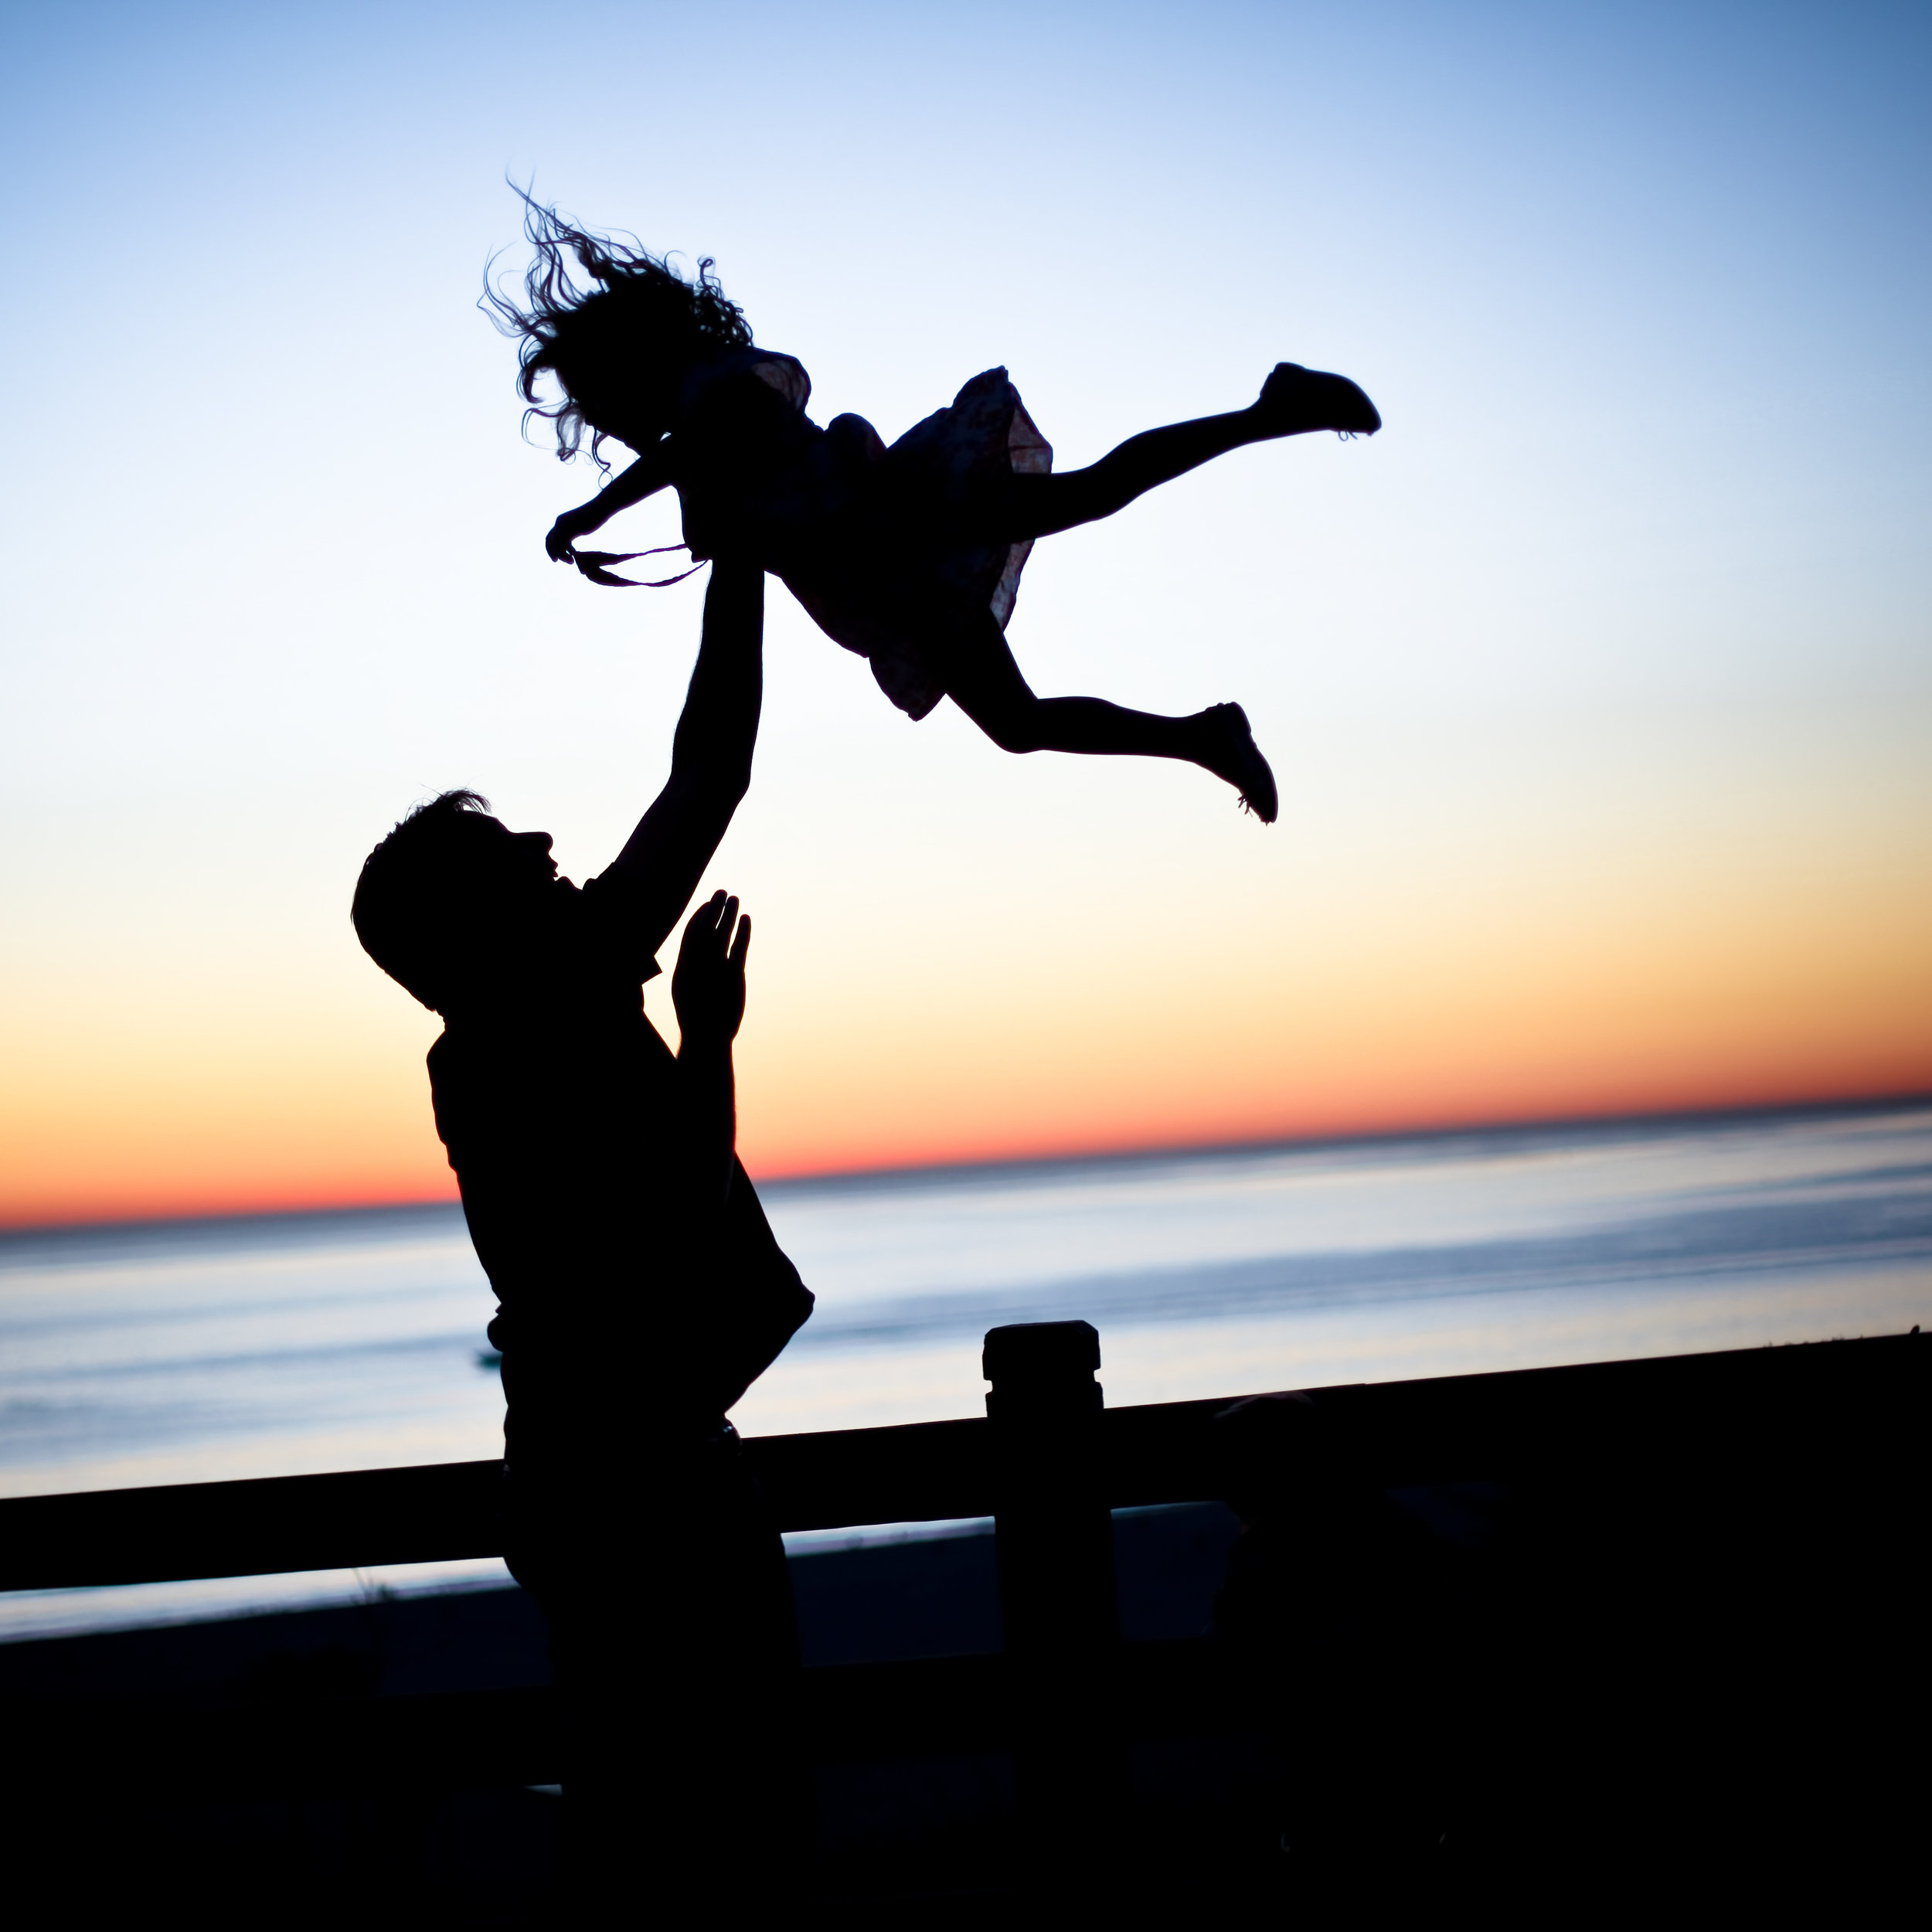 a silhouette of a man throwing a child up in the air